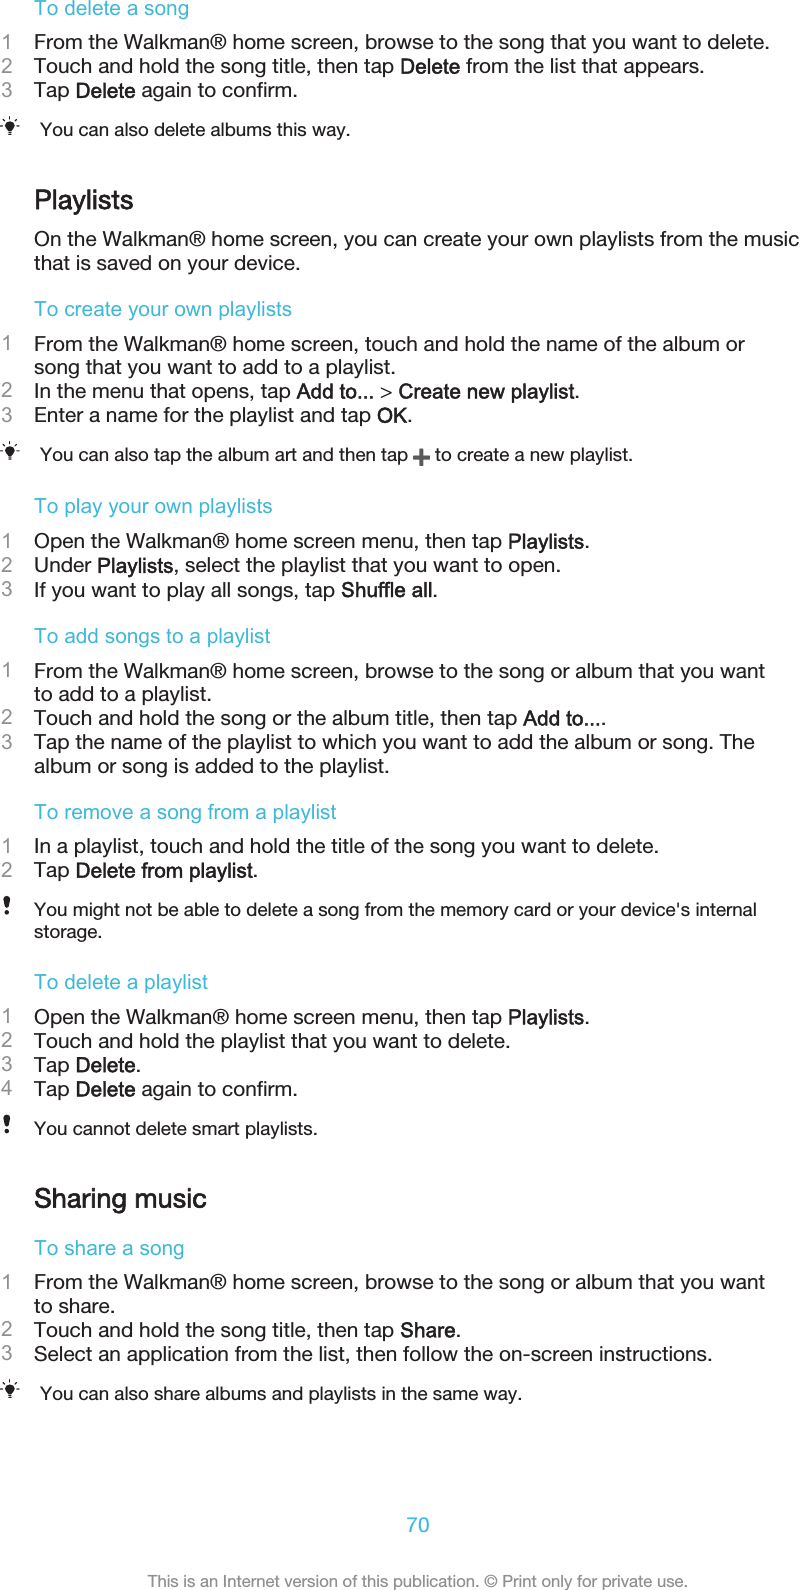 To delete a song1From the Walkman® home screen, browse to the song that you want to delete.2Touch and hold the song title, then tap Delete from the list that appears.3Tap Delete again to confirm.You can also delete albums this way.PlaylistsOn the Walkman® home screen, you can create your own playlists from the musicthat is saved on your device.To create your own playlists1From the Walkman® home screen, touch and hold the name of the album orsong that you want to add to a playlist.2In the menu that opens, tap Add to... &gt; Create new playlist.3Enter a name for the playlist and tap OK.You can also tap the album art and then tap   to create a new playlist.To play your own playlists1Open the Walkman® home screen menu, then tap Playlists.2Under Playlists, select the playlist that you want to open.3If you want to play all songs, tap Shuffle all.To add songs to a playlist1From the Walkman® home screen, browse to the song or album that you wantto add to a playlist.2Touch and hold the song or the album title, then tap Add to....3Tap the name of the playlist to which you want to add the album or song. Thealbum or song is added to the playlist.To remove a song from a playlist1In a playlist, touch and hold the title of the song you want to delete.2Tap Delete from playlist.You might not be able to delete a song from the memory card or your device&apos;s internalstorage.To delete a playlist1Open the Walkman® home screen menu, then tap Playlists.2Touch and hold the playlist that you want to delete.3Tap Delete.4Tap Delete again to confirm.You cannot delete smart playlists.Sharing musicTo share a song1From the Walkman® home screen, browse to the song or album that you wantto share.2Touch and hold the song title, then tap Share.3Select an application from the list, then follow the on-screen instructions.You can also share albums and playlists in the same way.70This is an Internet version of this publication. © Print only for private use.